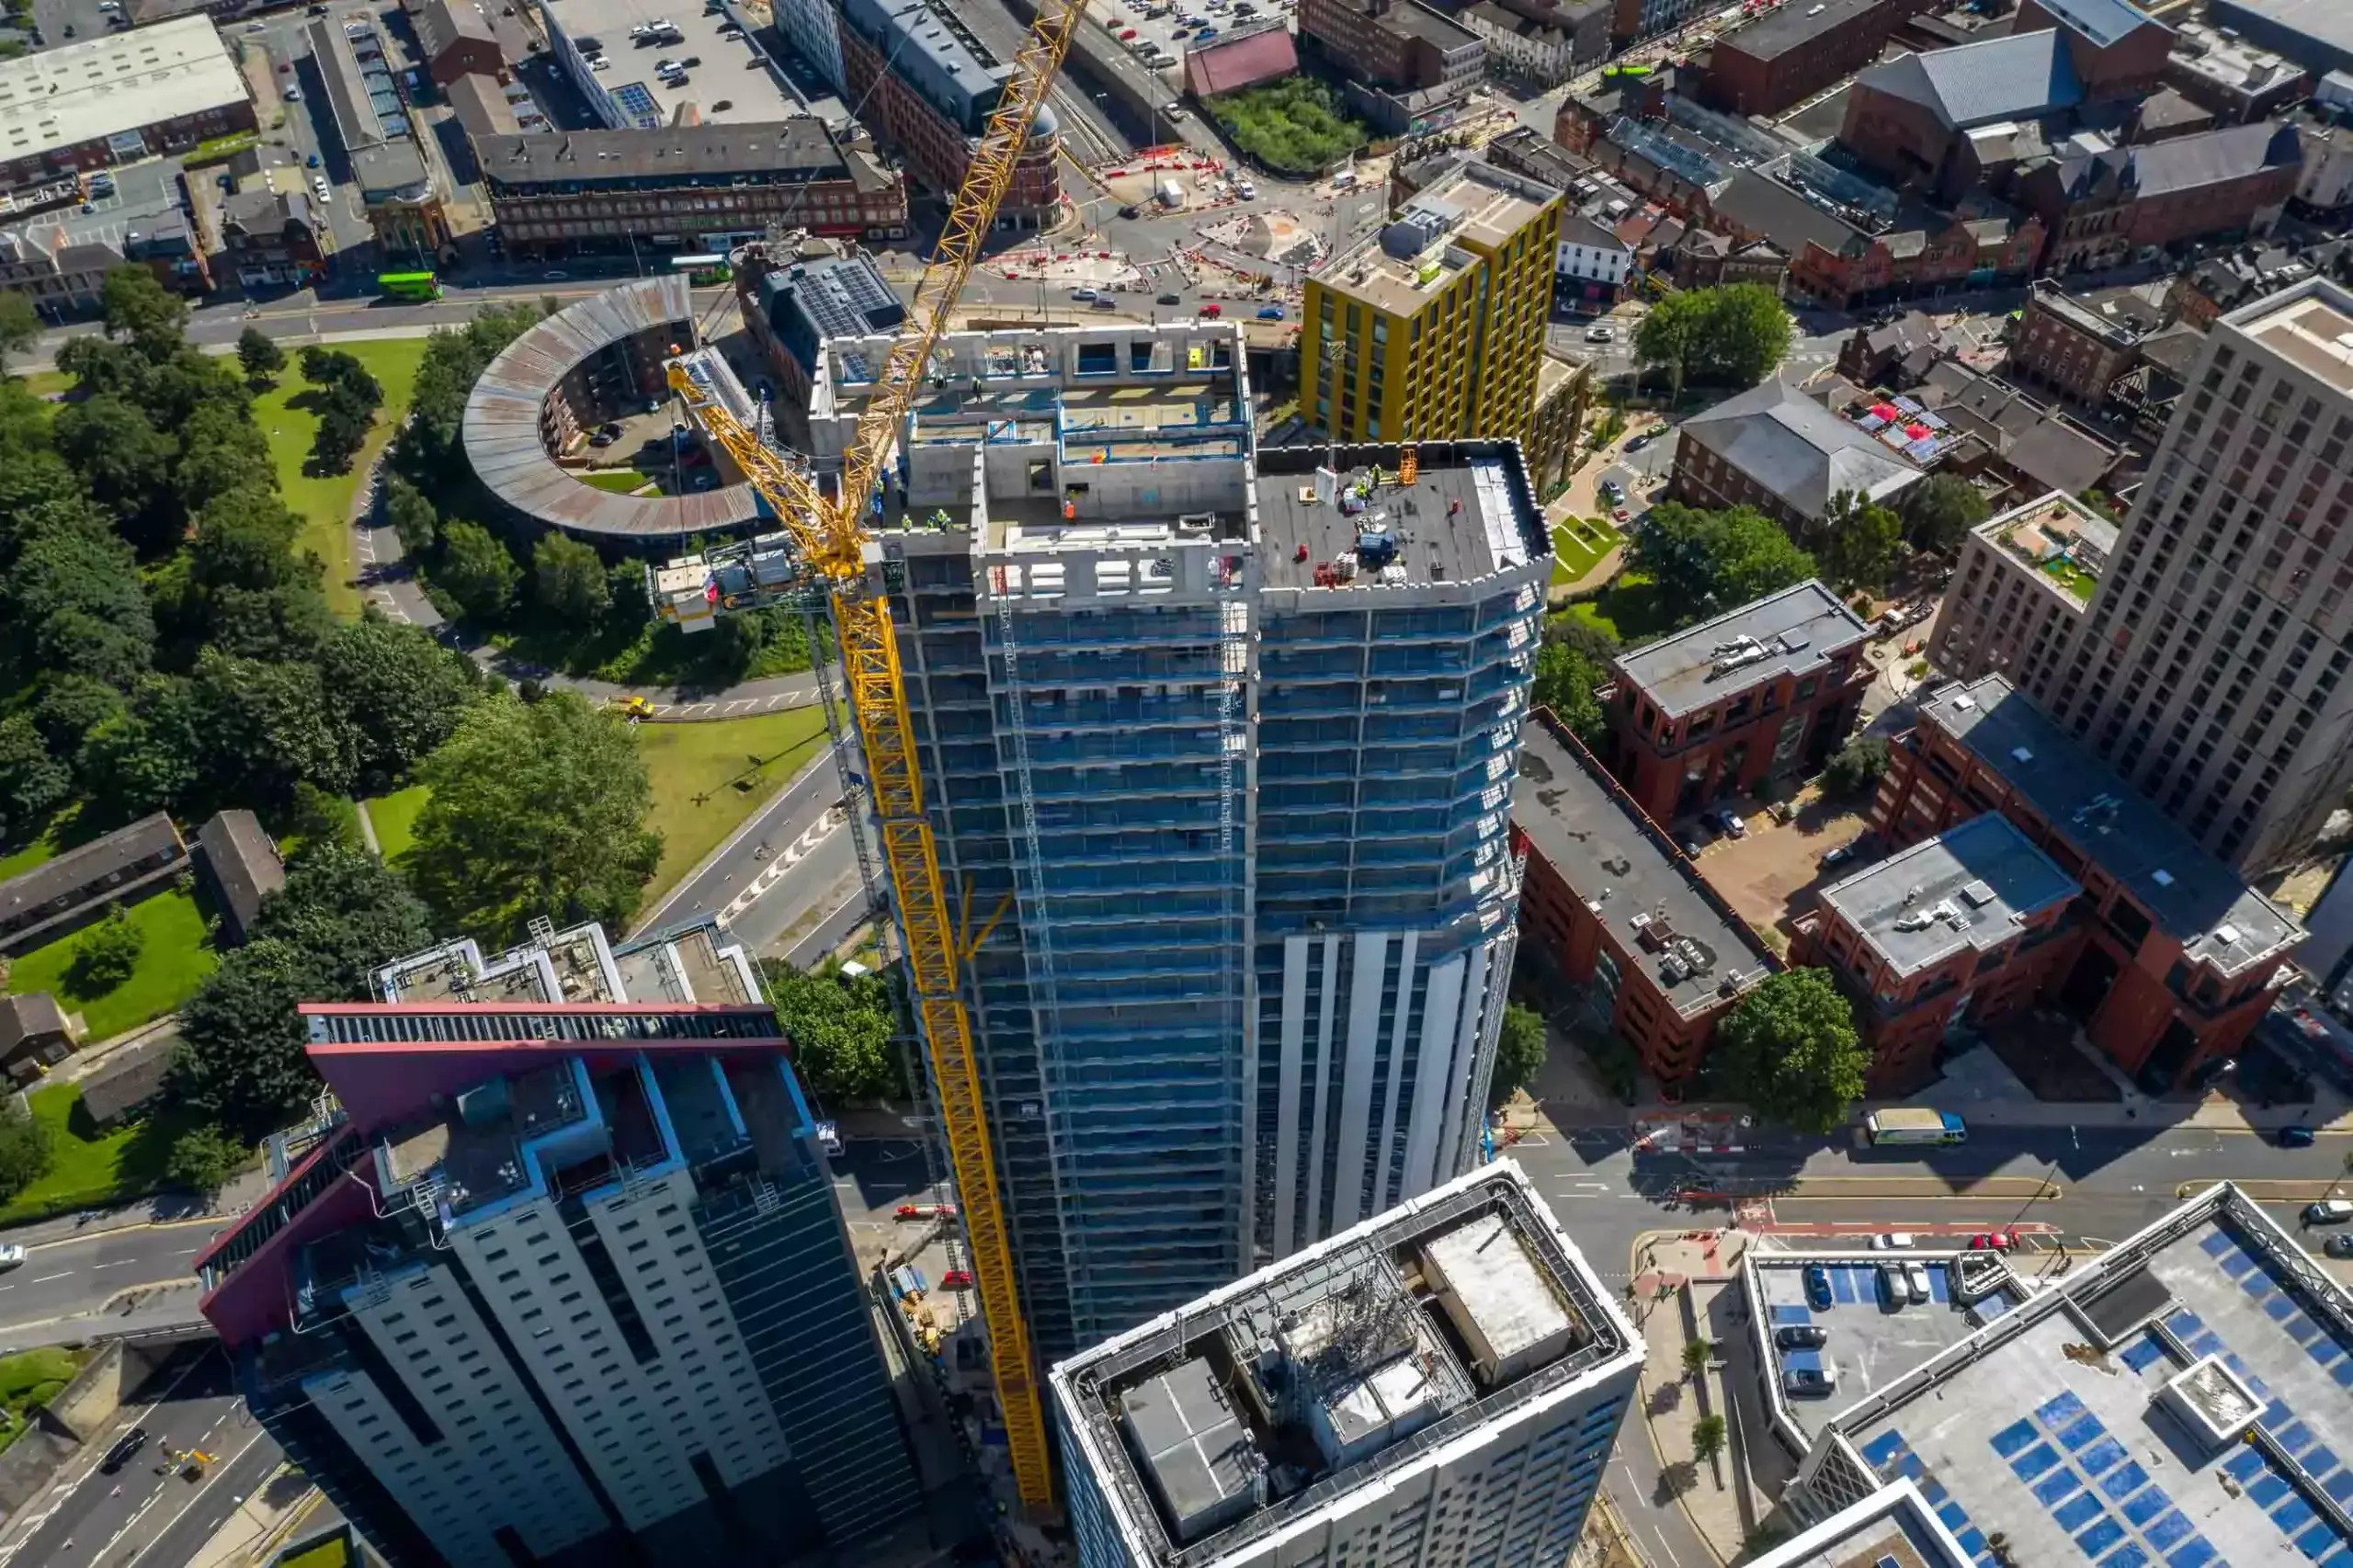 Aerial drone survey on the tallest building in Leeds